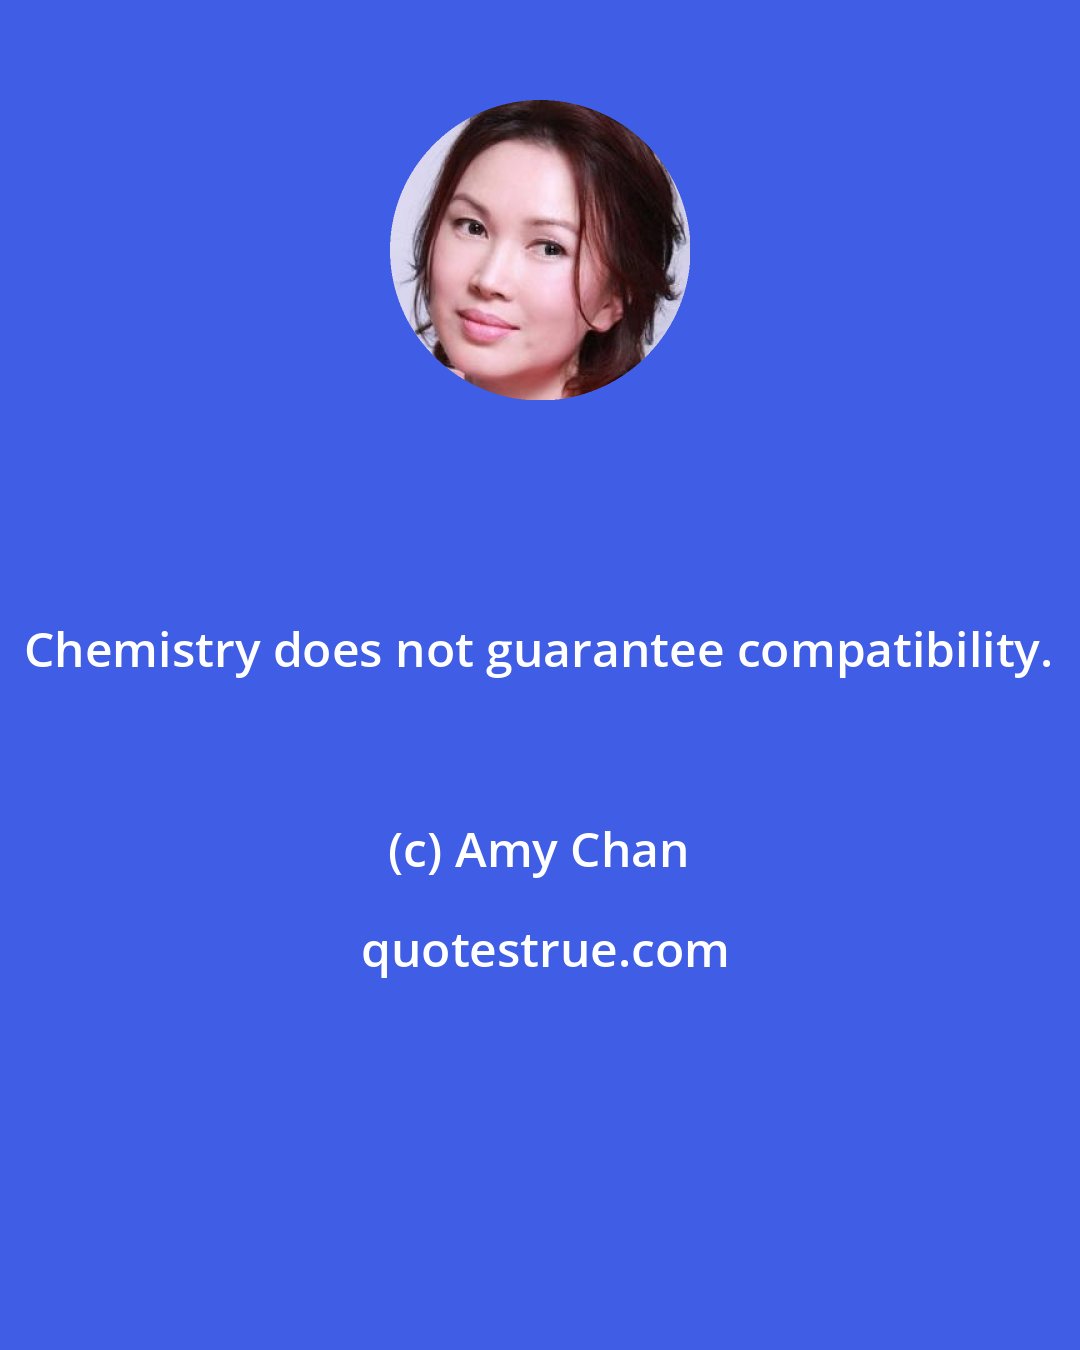 Amy Chan: Chemistry does not guarantee compatibility.